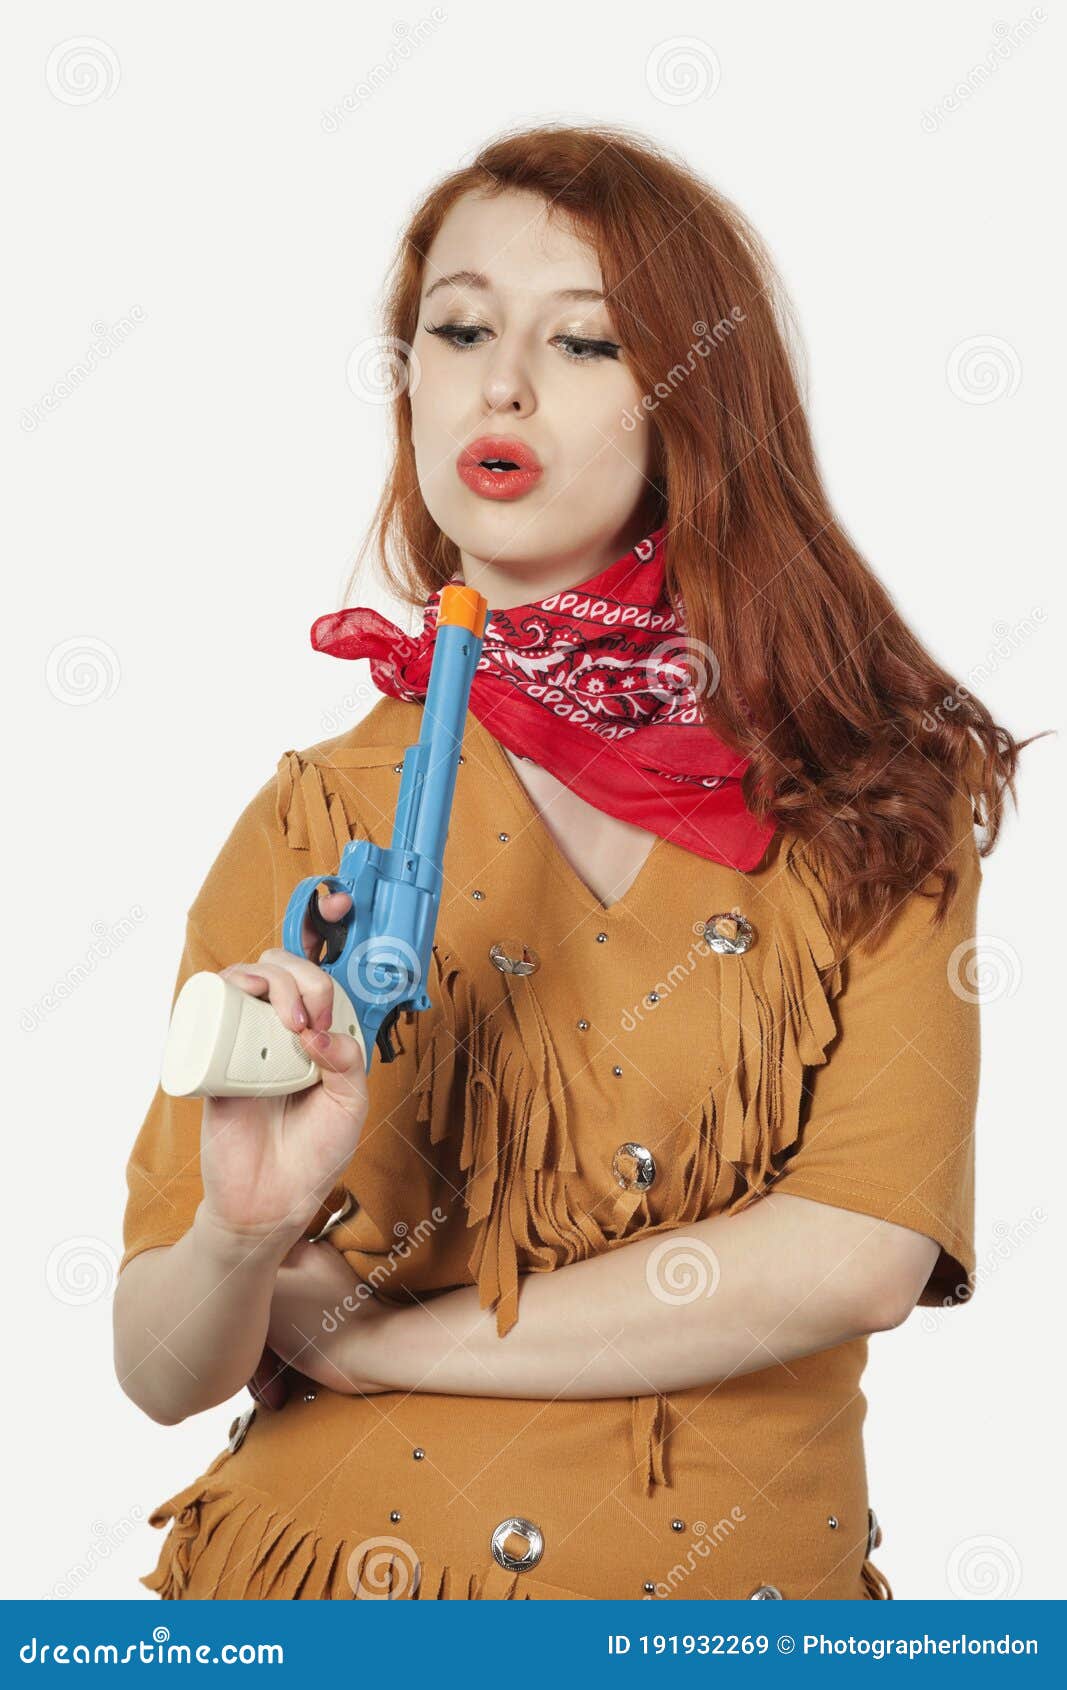 Young Cowgirl With Toy Pistol Against Gray Ba